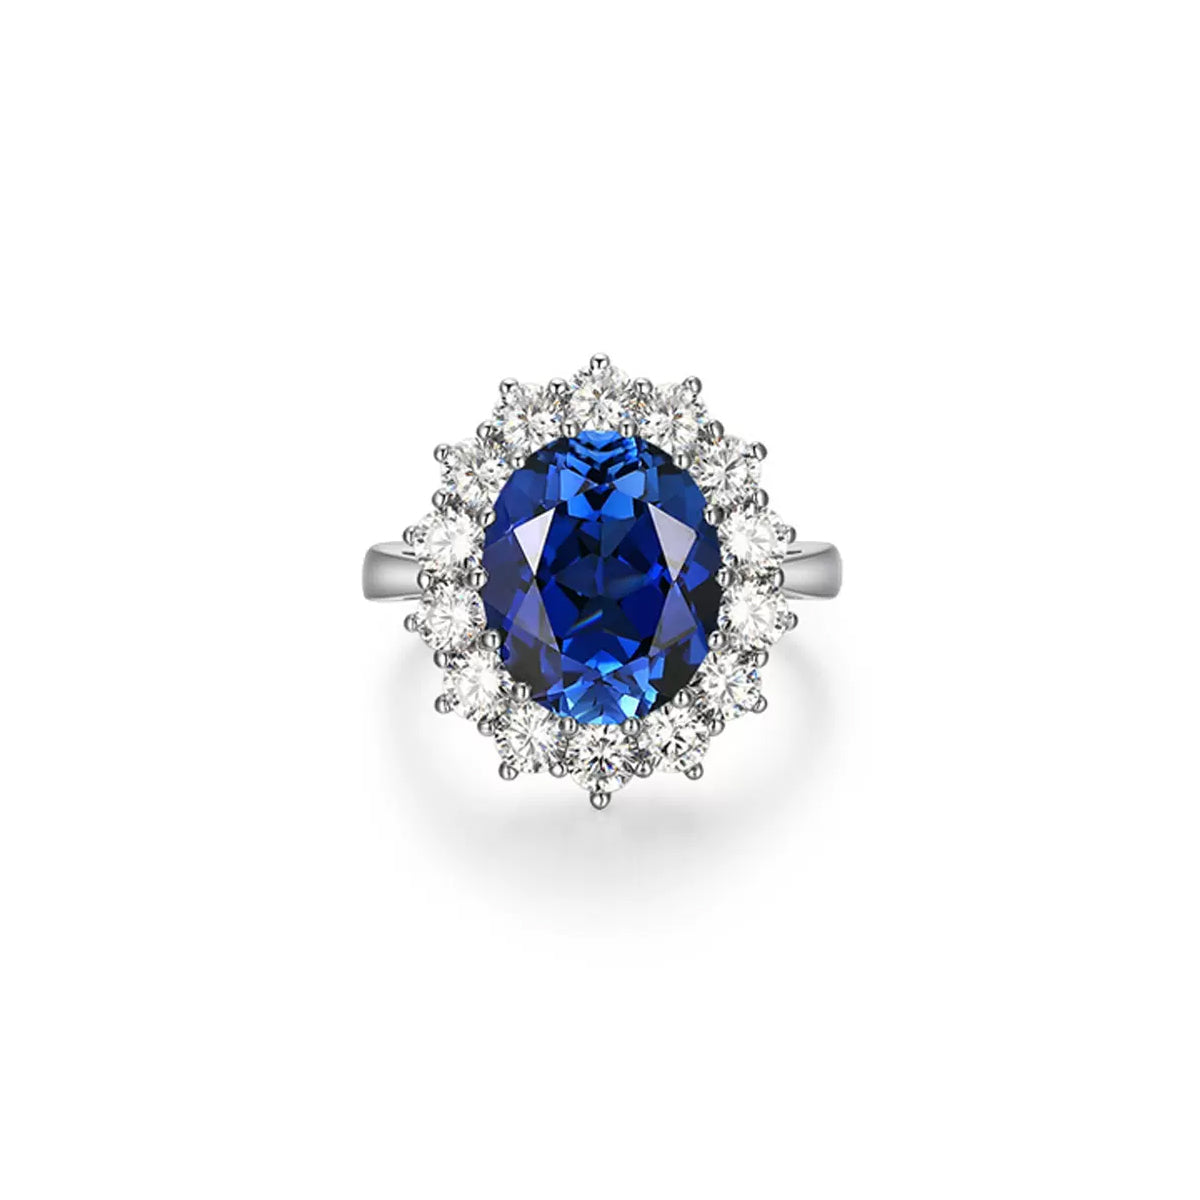 Siliice Jewelry - Sapphire Series - Princess Diana  Inspired Ring - Royal Blue Cornflower Ring Lab-grown Gemstones For Women